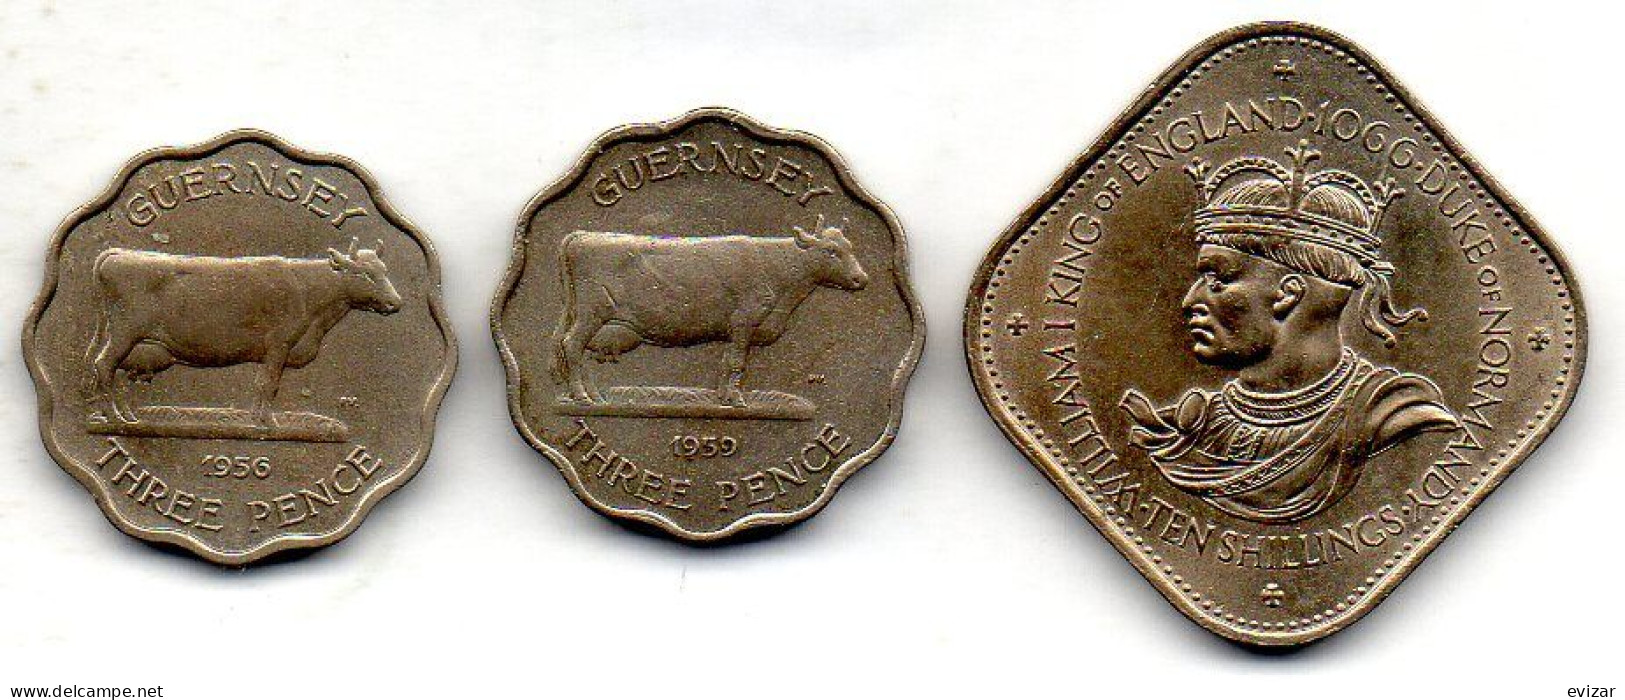 GUERNSEY, Set Of Three Coins 3 Pence, 10 Shillings, Copper-Nickel, Year 1956-66, KM # 17, 18, 19 - Guernsey